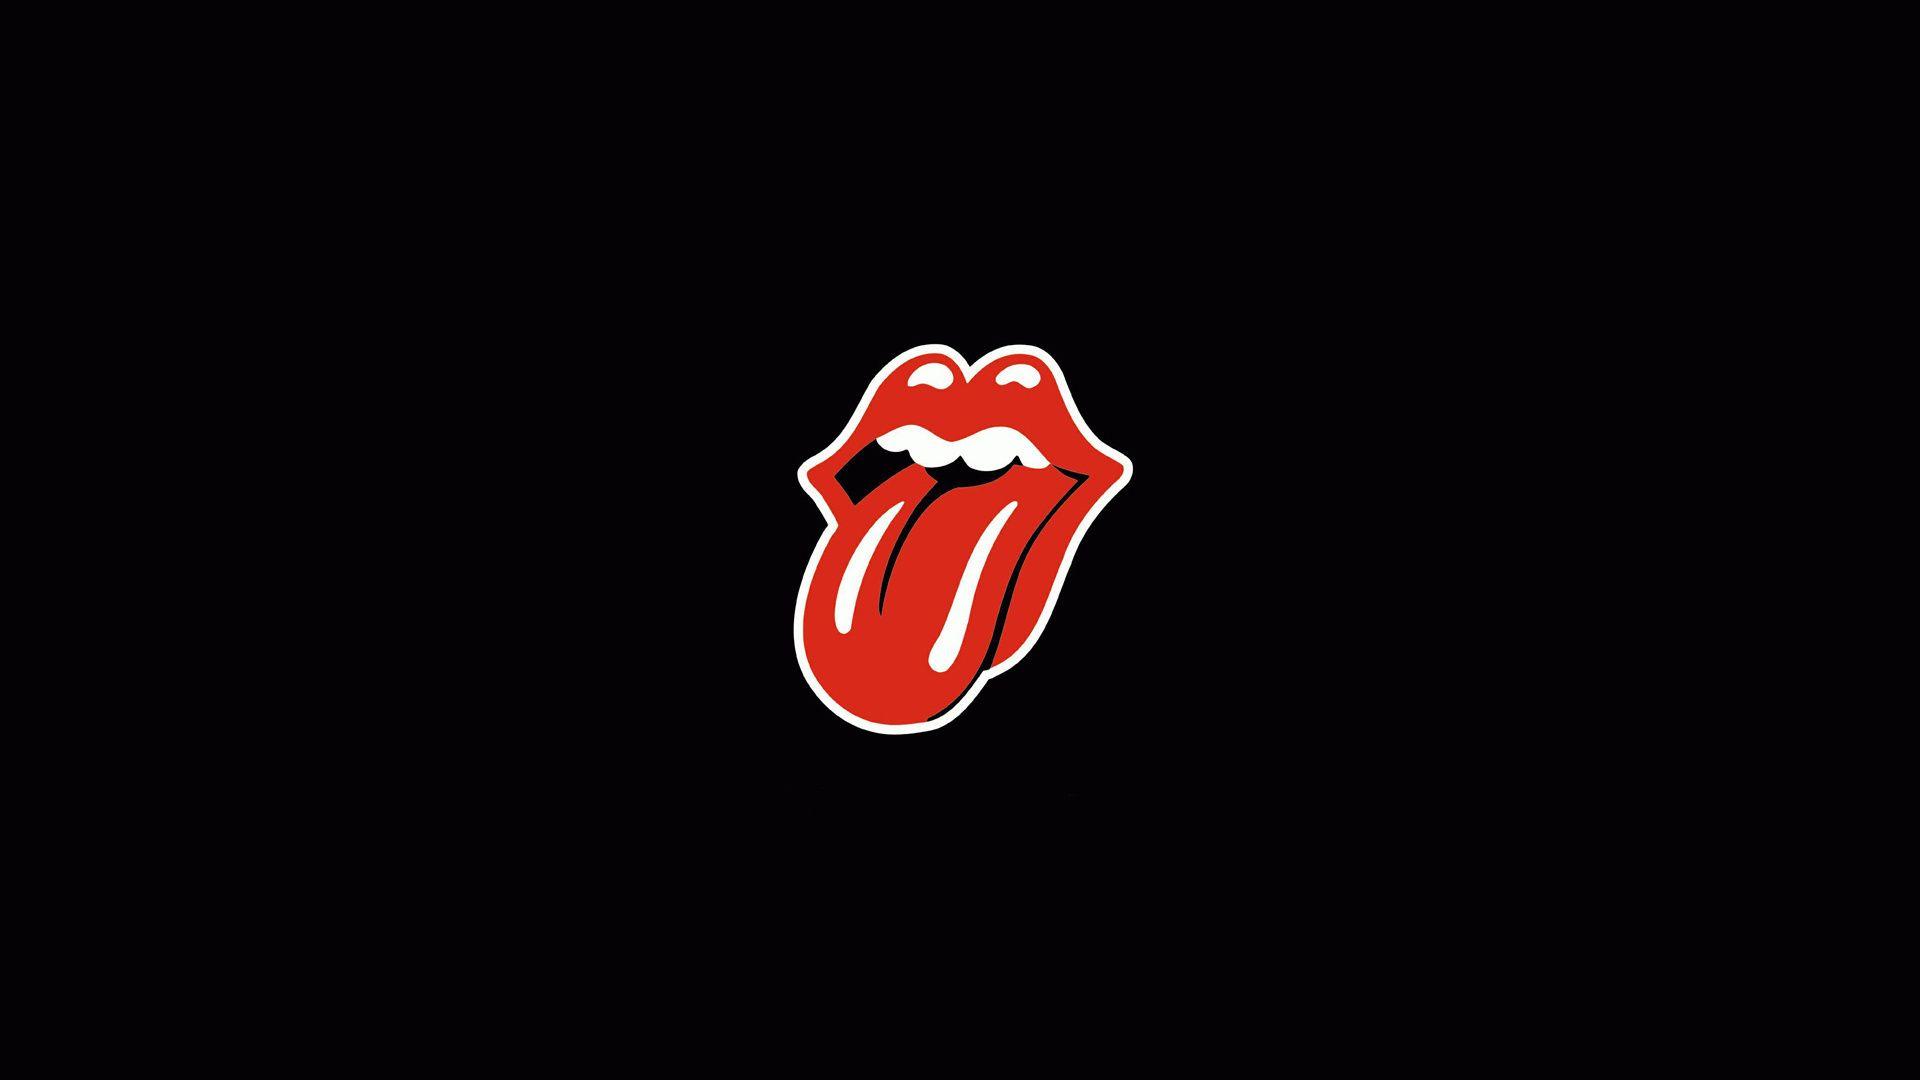 Rolling Stones, Rock, Logo Wallpaper and Picture, Photo